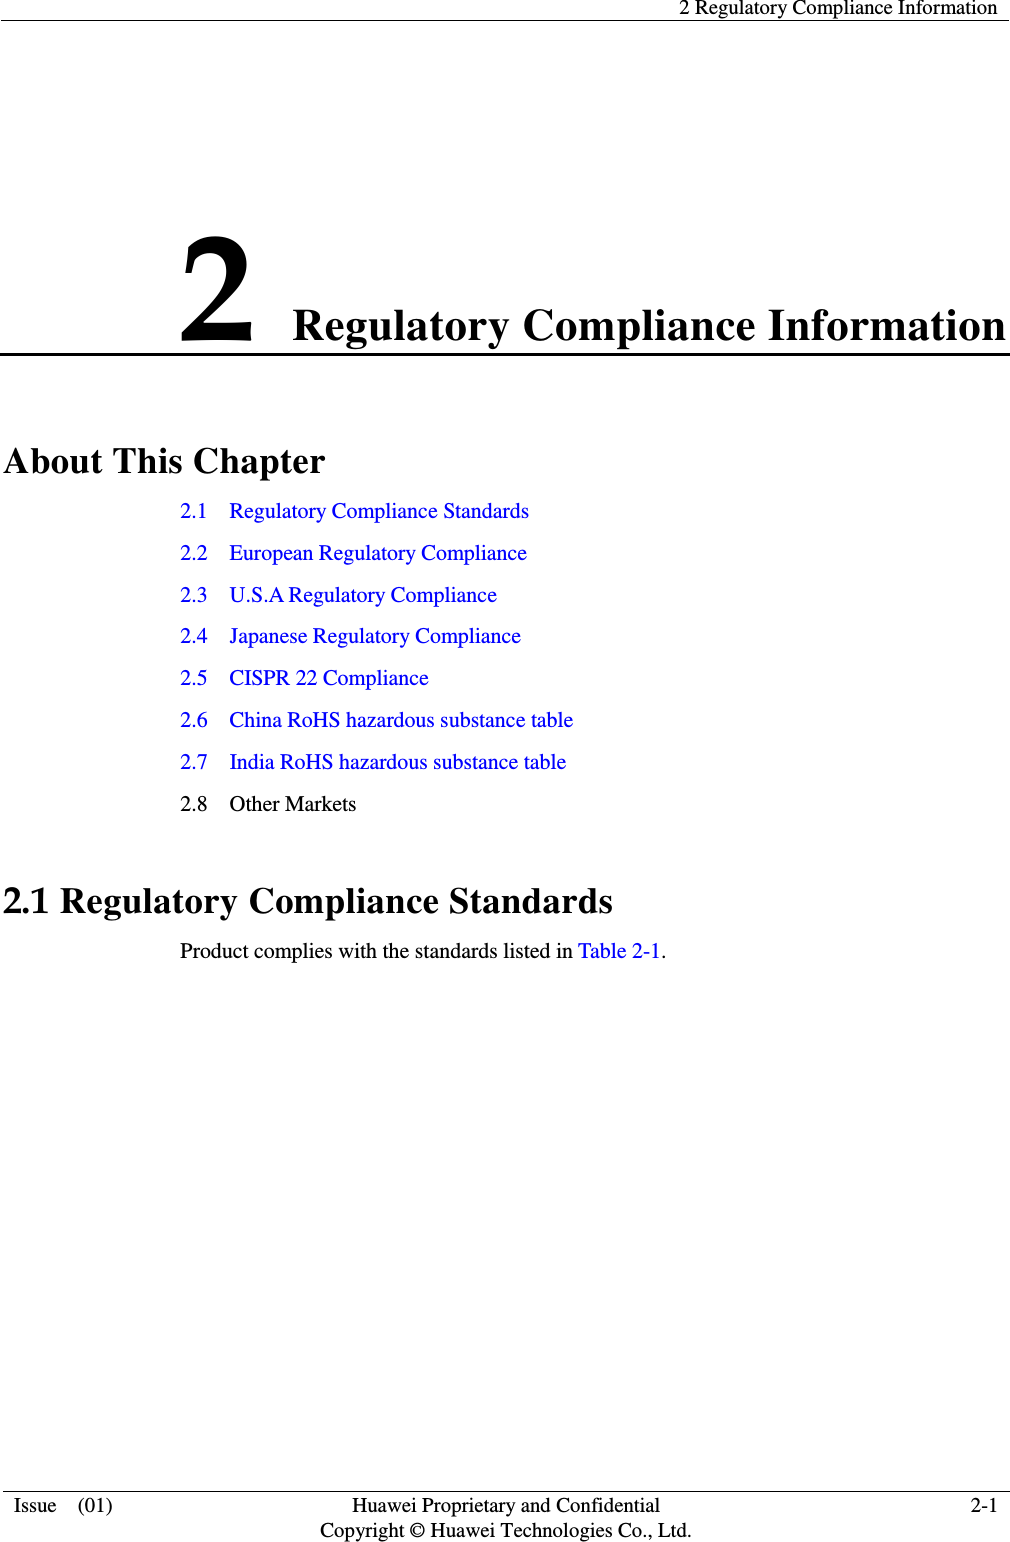   2 Regulatory Compliance Information  Issue    (01) Huawei Proprietary and Confidential                                     Copyright © Huawei Technologies Co., Ltd. 2-1  2 Regulatory Compliance Information About This Chapter 2.1    Regulatory Compliance Standards 2.2    European Regulatory Compliance 2.3    U.S.A Regulatory Compliance                                                                                     2.4  Japanese Regulatory Compliance 2.5  CISPR 22 Compliance   2.6  China RoHS hazardous substance table 2.7  India RoHS hazardous substance table 2.8  Other Markets 2.1 Regulatory Compliance Standards Product complies with the standards listed in Table 2-1. 